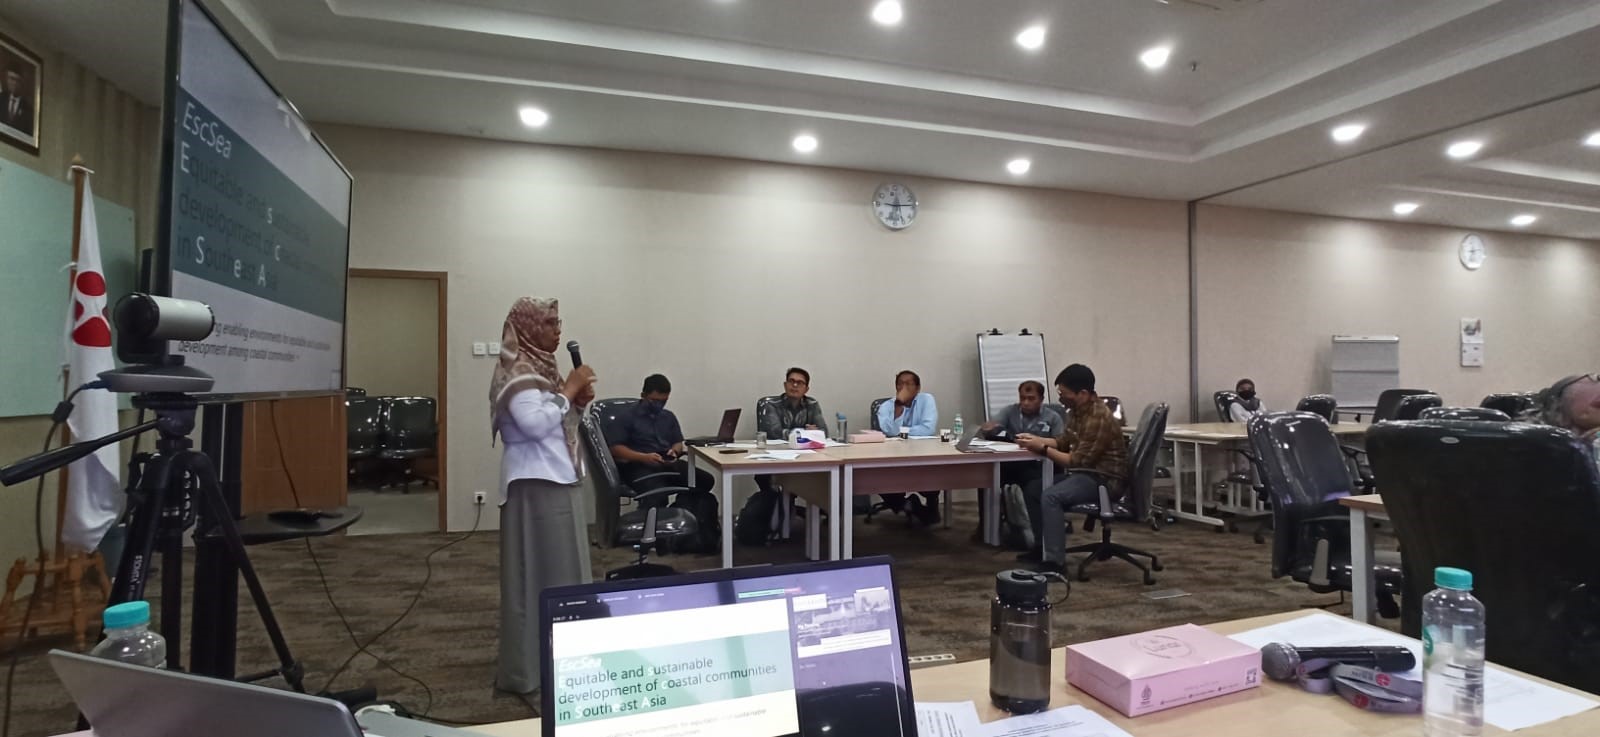 Dr. Umi Muawanah gives her welcoming remarks and the inauguration of the workshop.